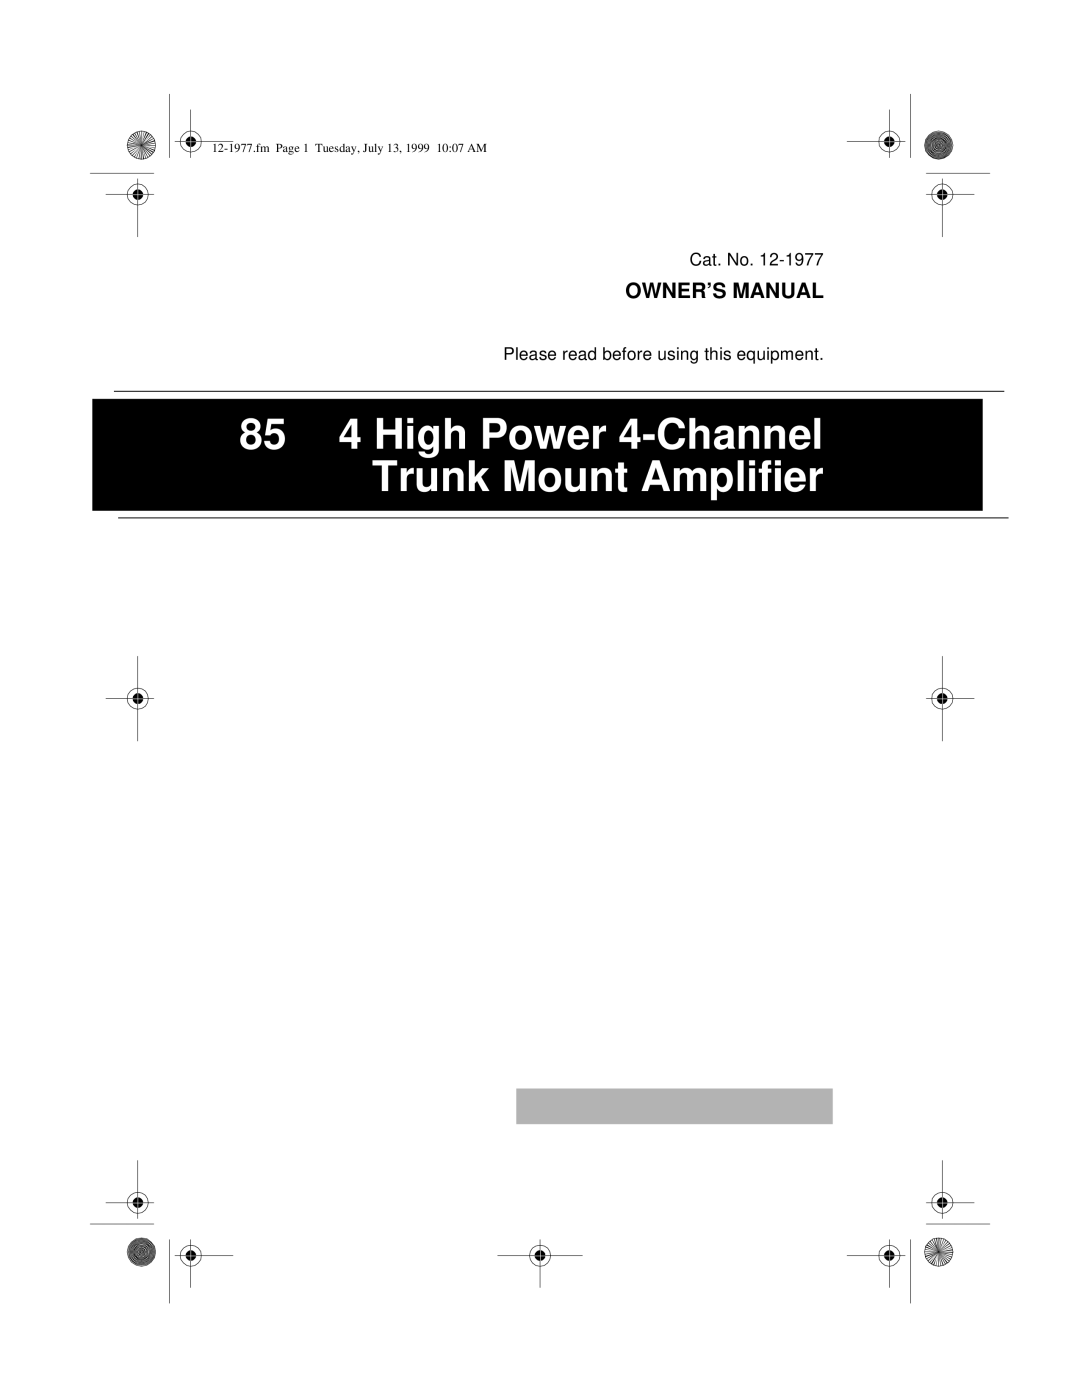 Radio Shack owner manual 85× 4 High Power 4-Channel Trunk Mount Amplifier, fmPage 1 Tuesday, July 13, 1999 10 07 AM 